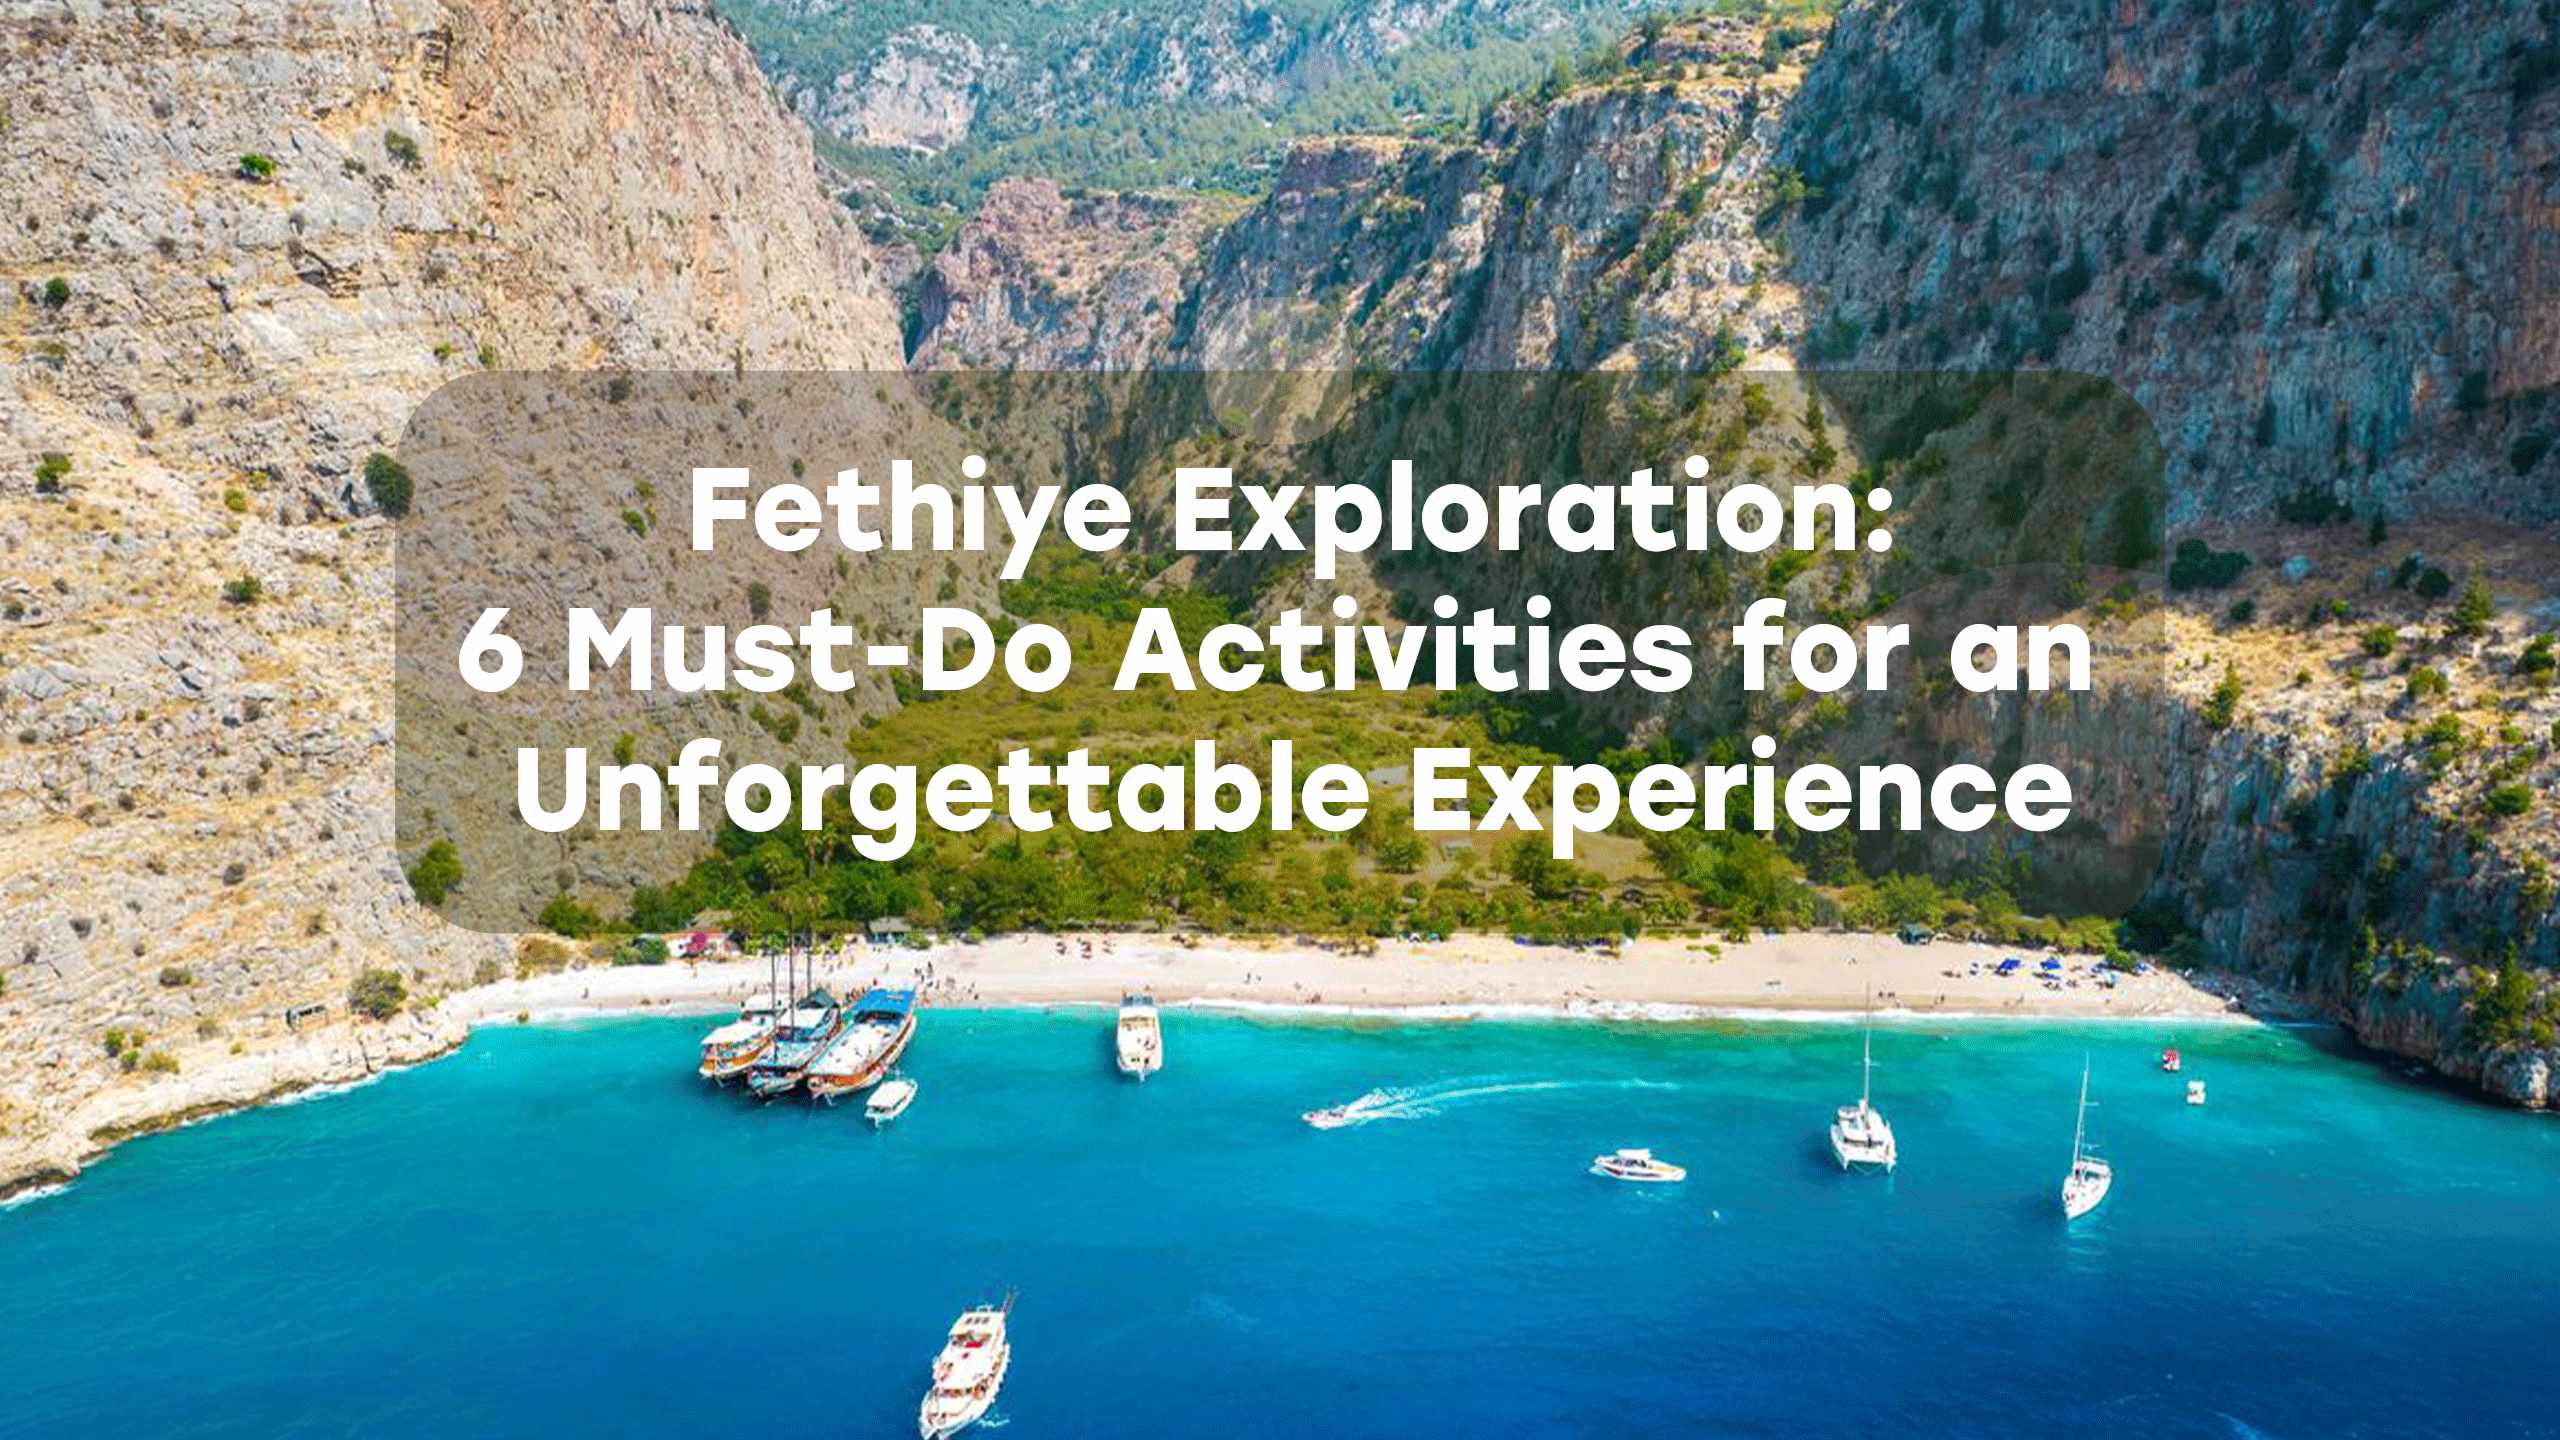 Fethiye Exploration: 6 Must-Do Activities for an Unforgettable Experience Everytours